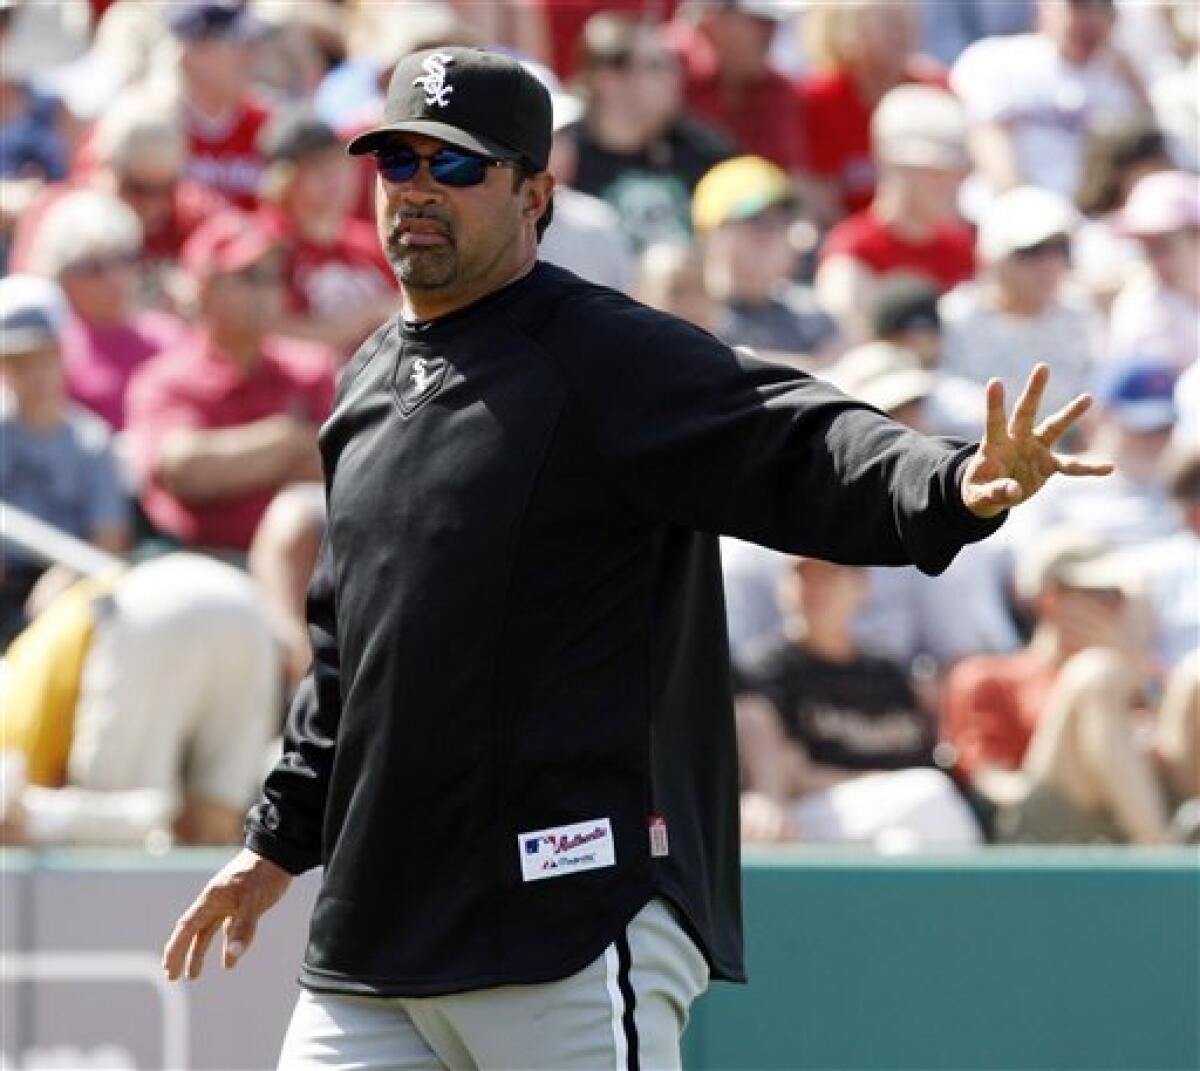 Ozzie Guillen: No personal problems with anyone